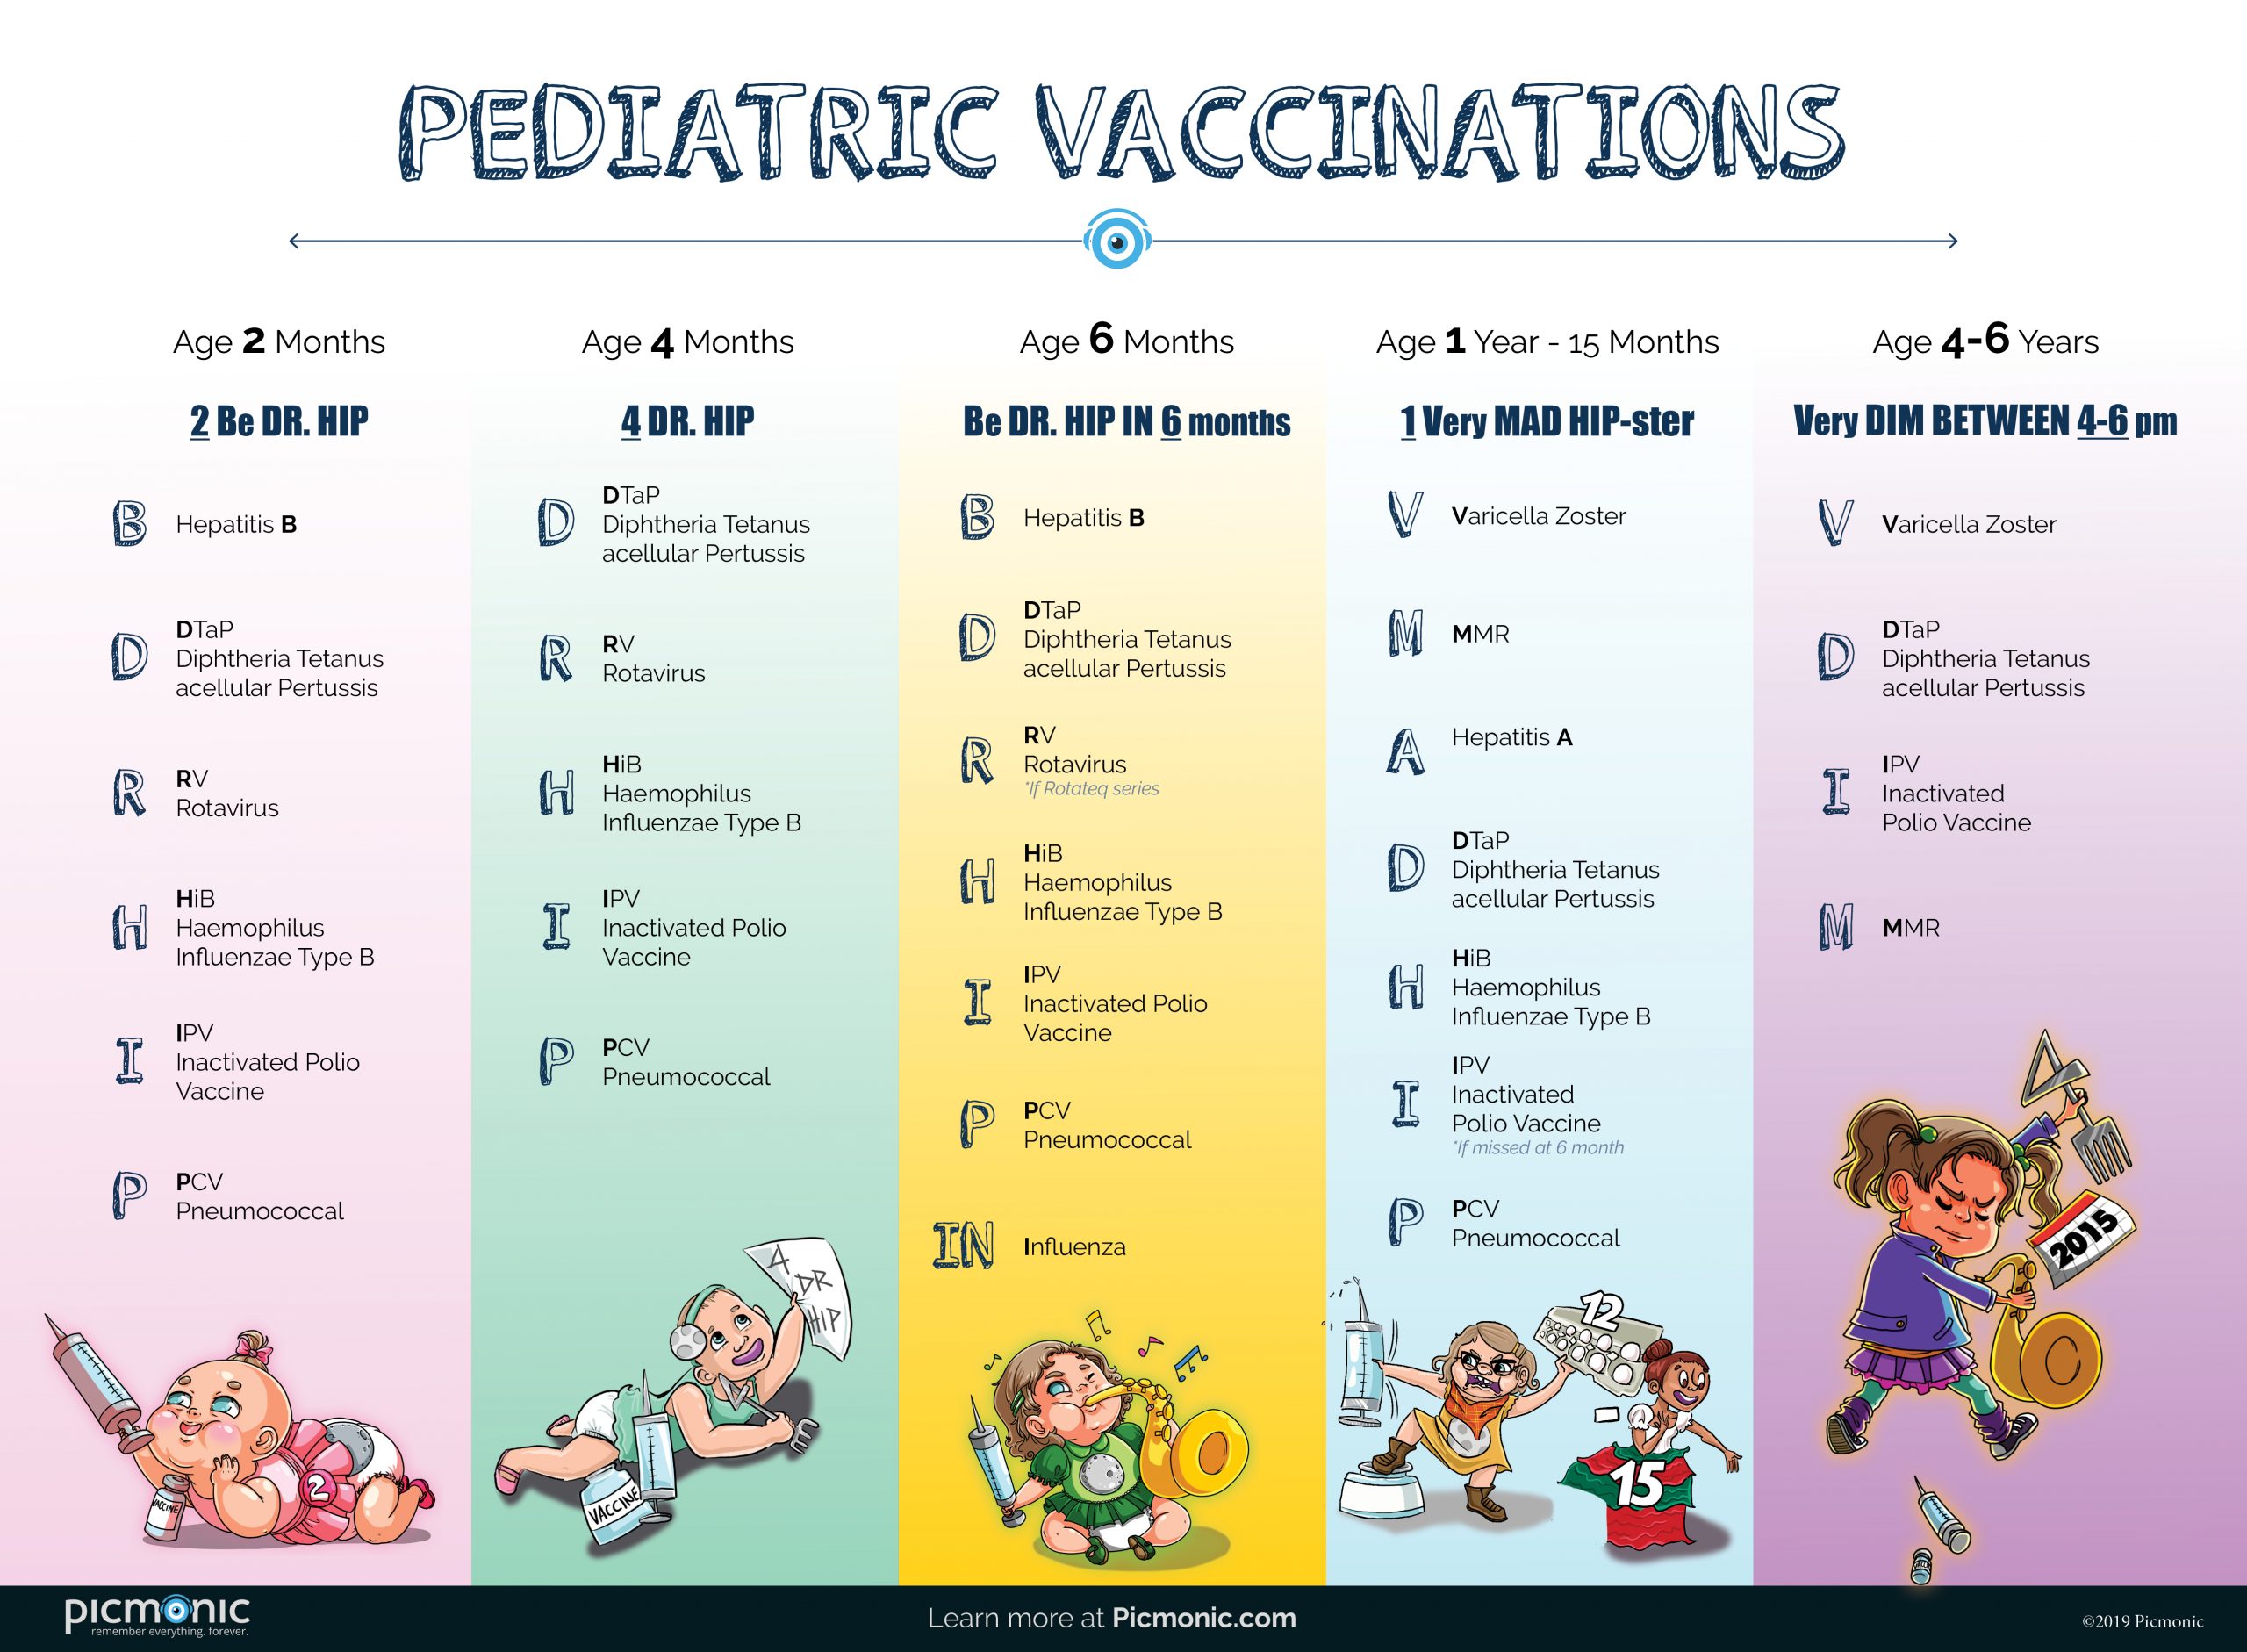 Which of the following is a common childhood immunization?